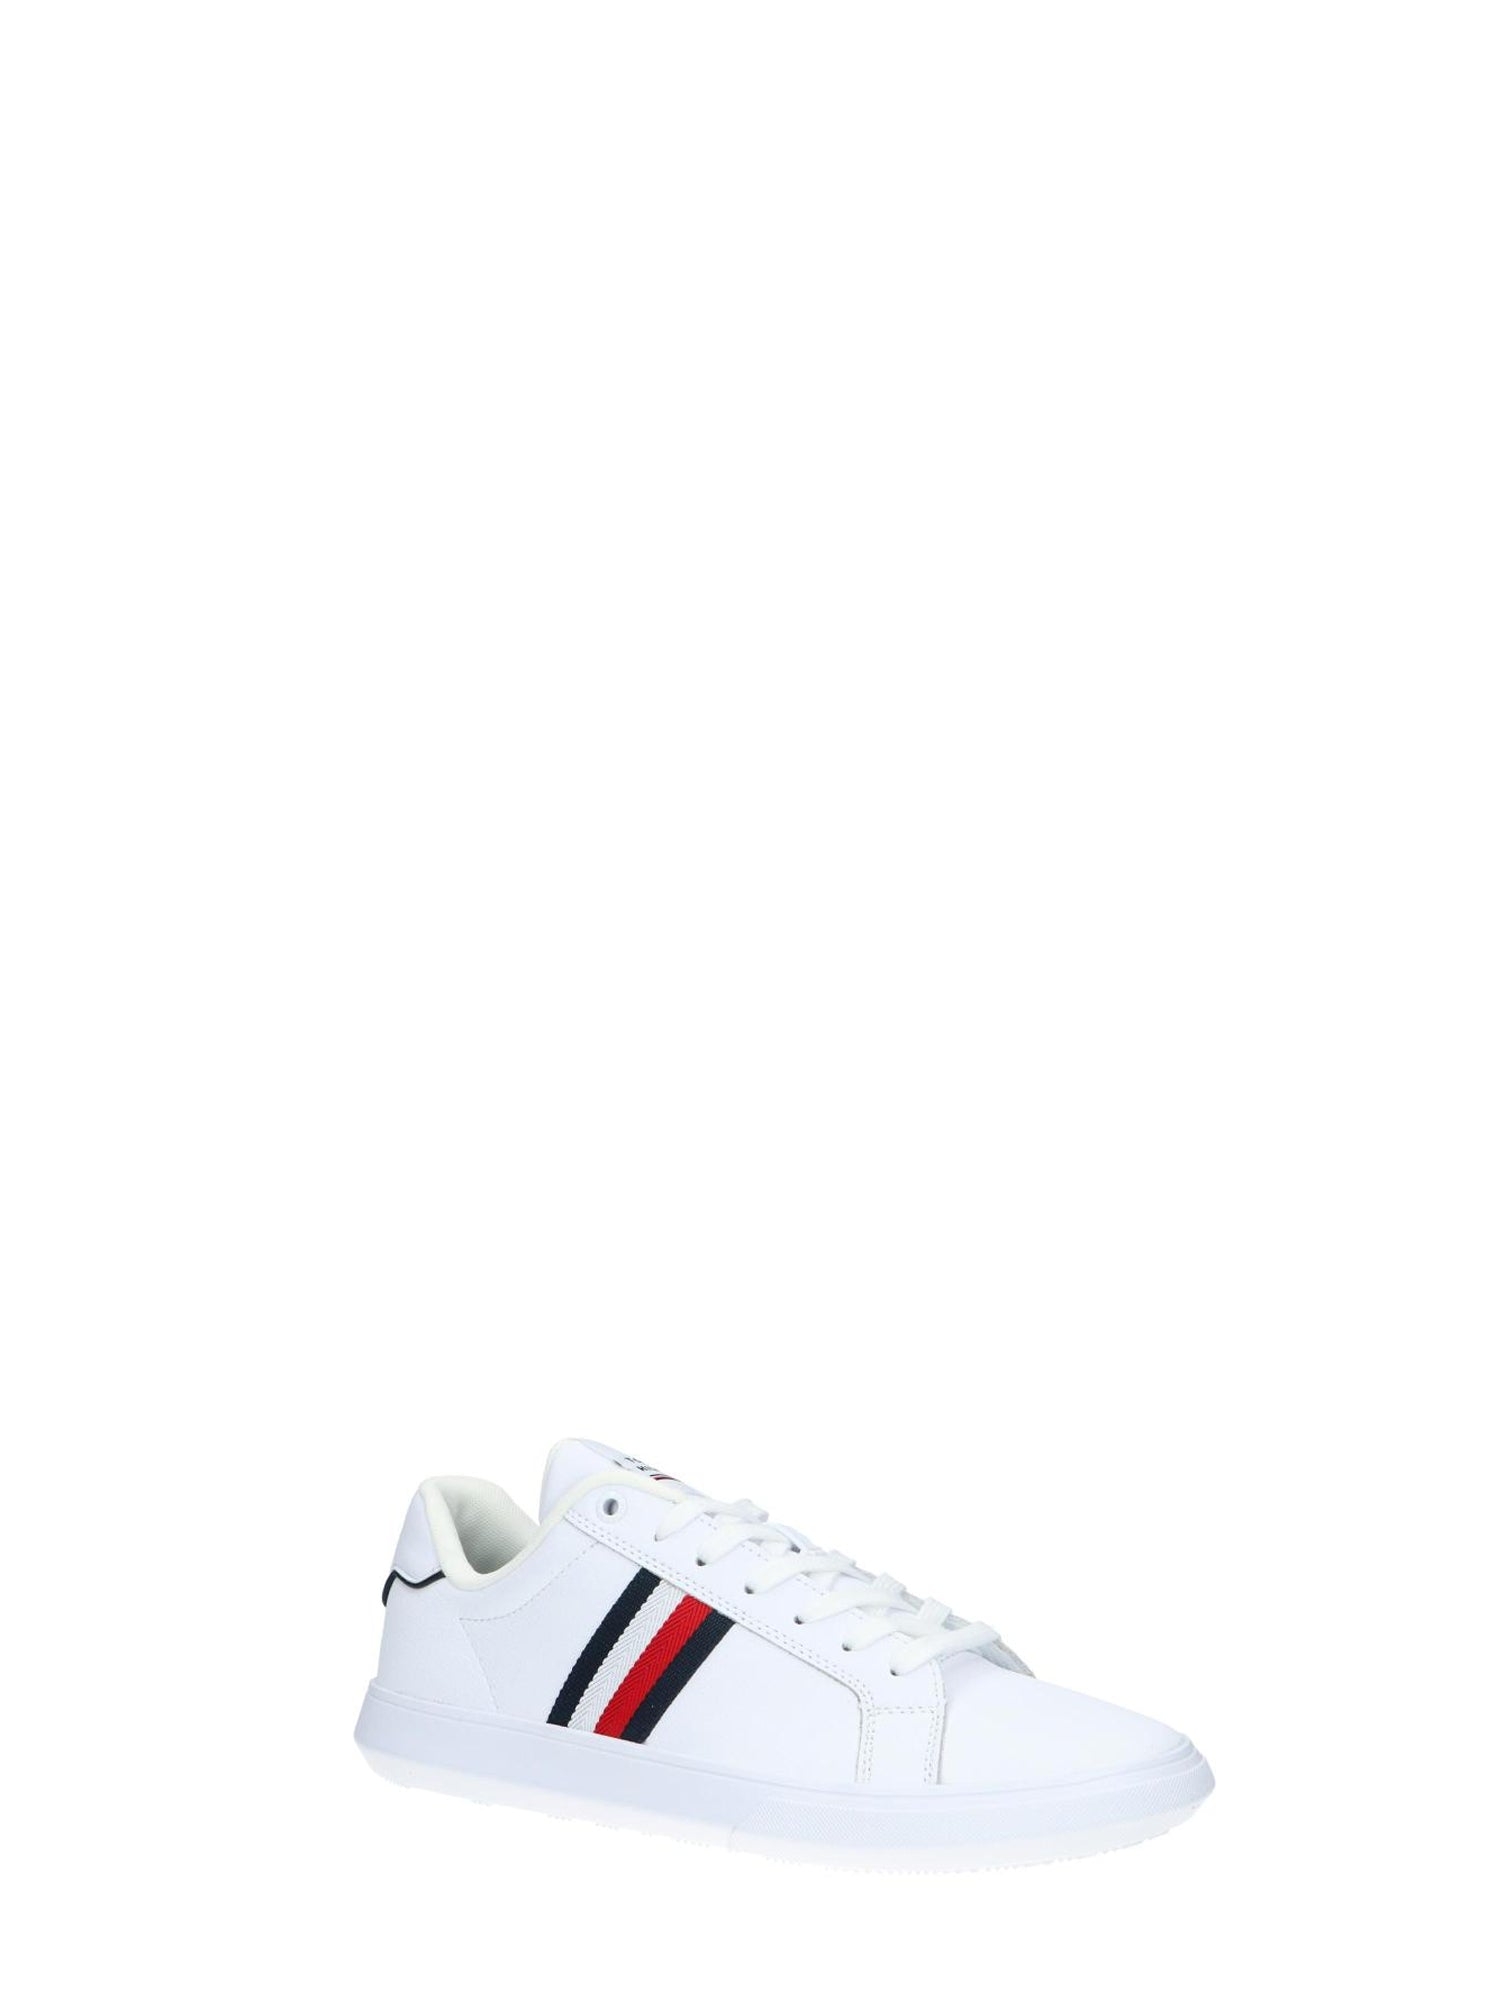 TOMMY HILFIGER SHOES SNEAKERS BASSE CORPORATE BIANCO